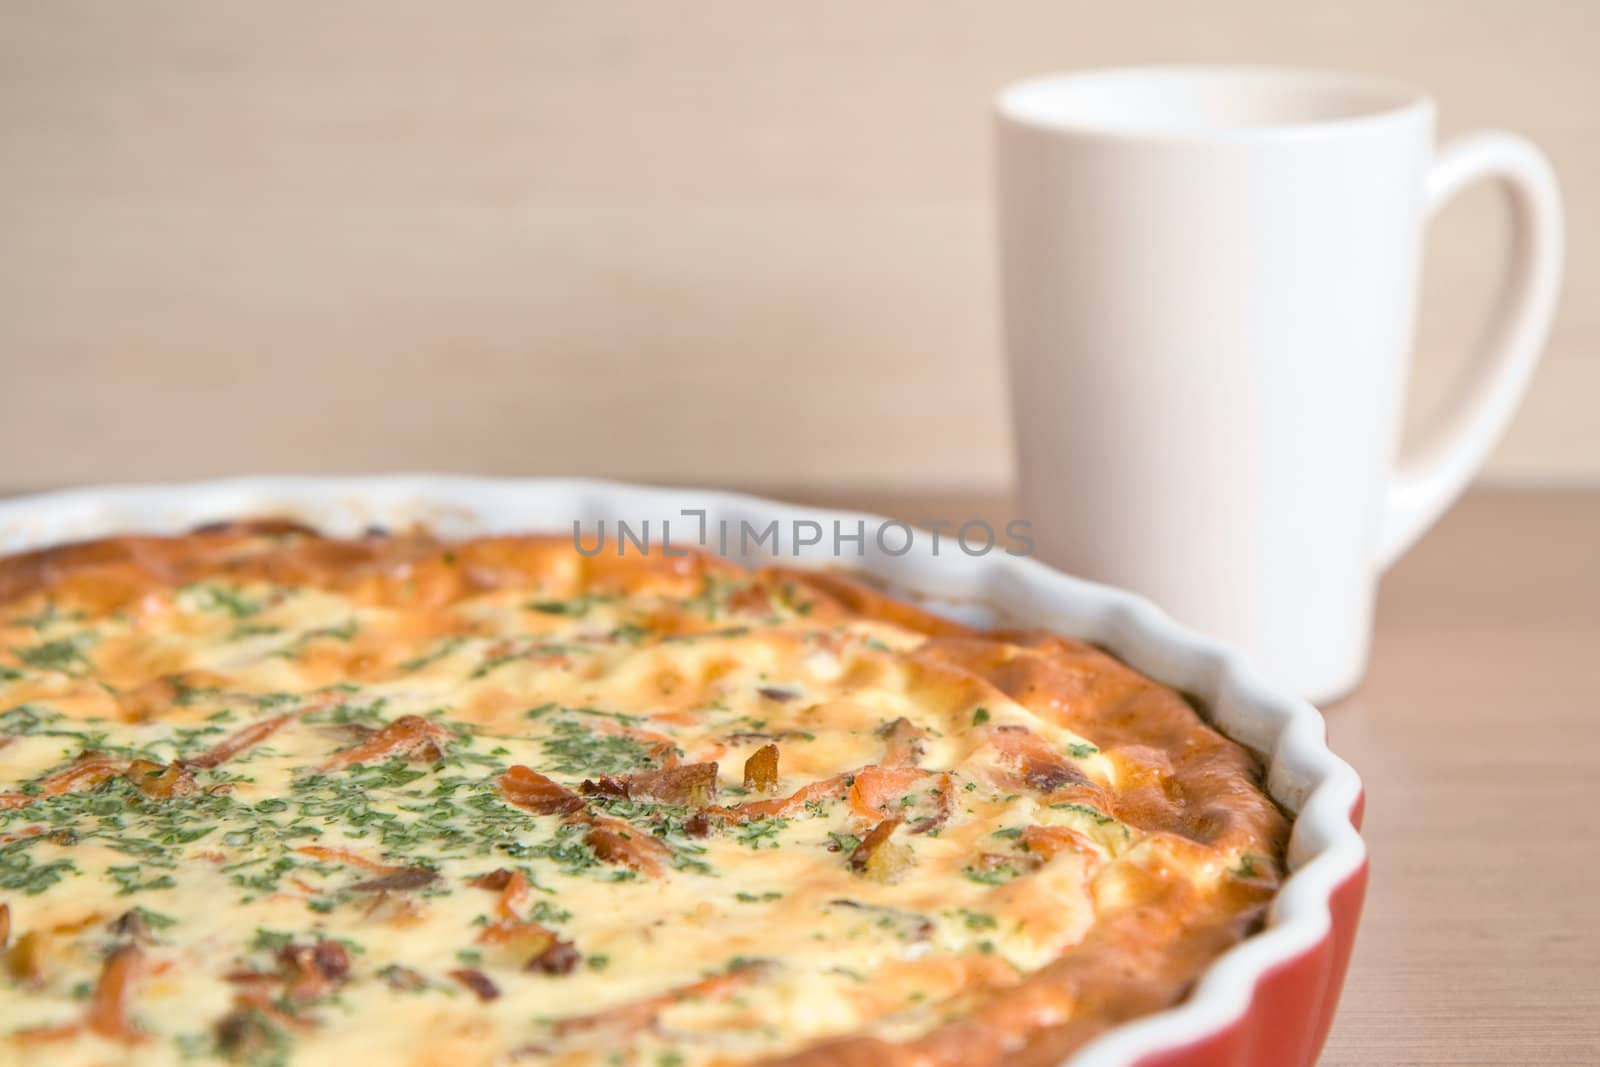 quiche on a plate, very shallow DOF